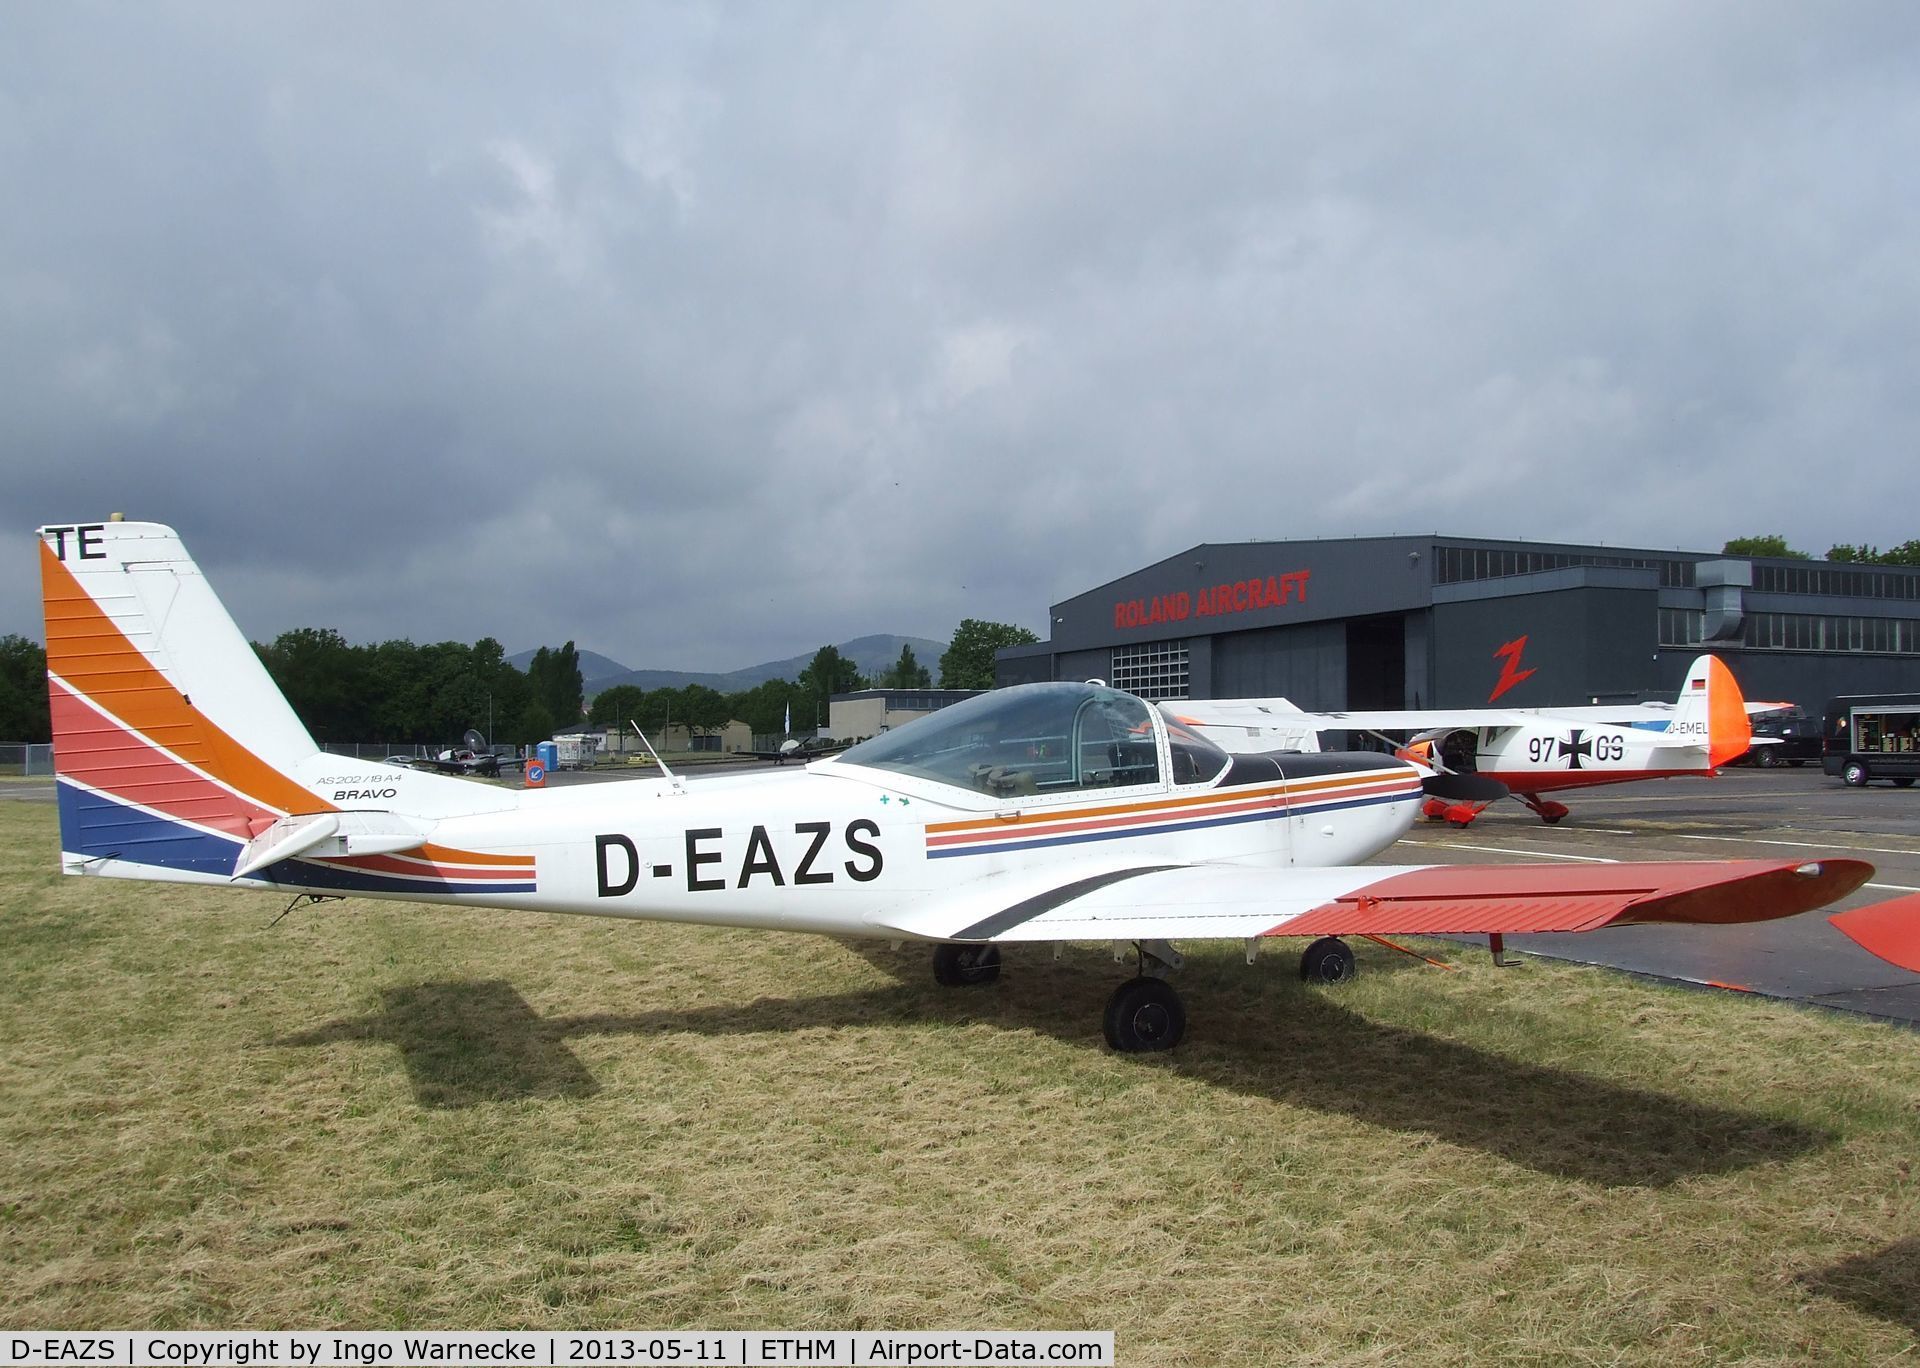 D-EAZS, 1987 FFA AS-202/18A-4 Bravo C/N 224, FFA AS-202/18A4 Bravo during an open day at the Fliegendes Museum Mendig (Flying Museum) at former German Army Aviation base, now civilian Mendig airfield